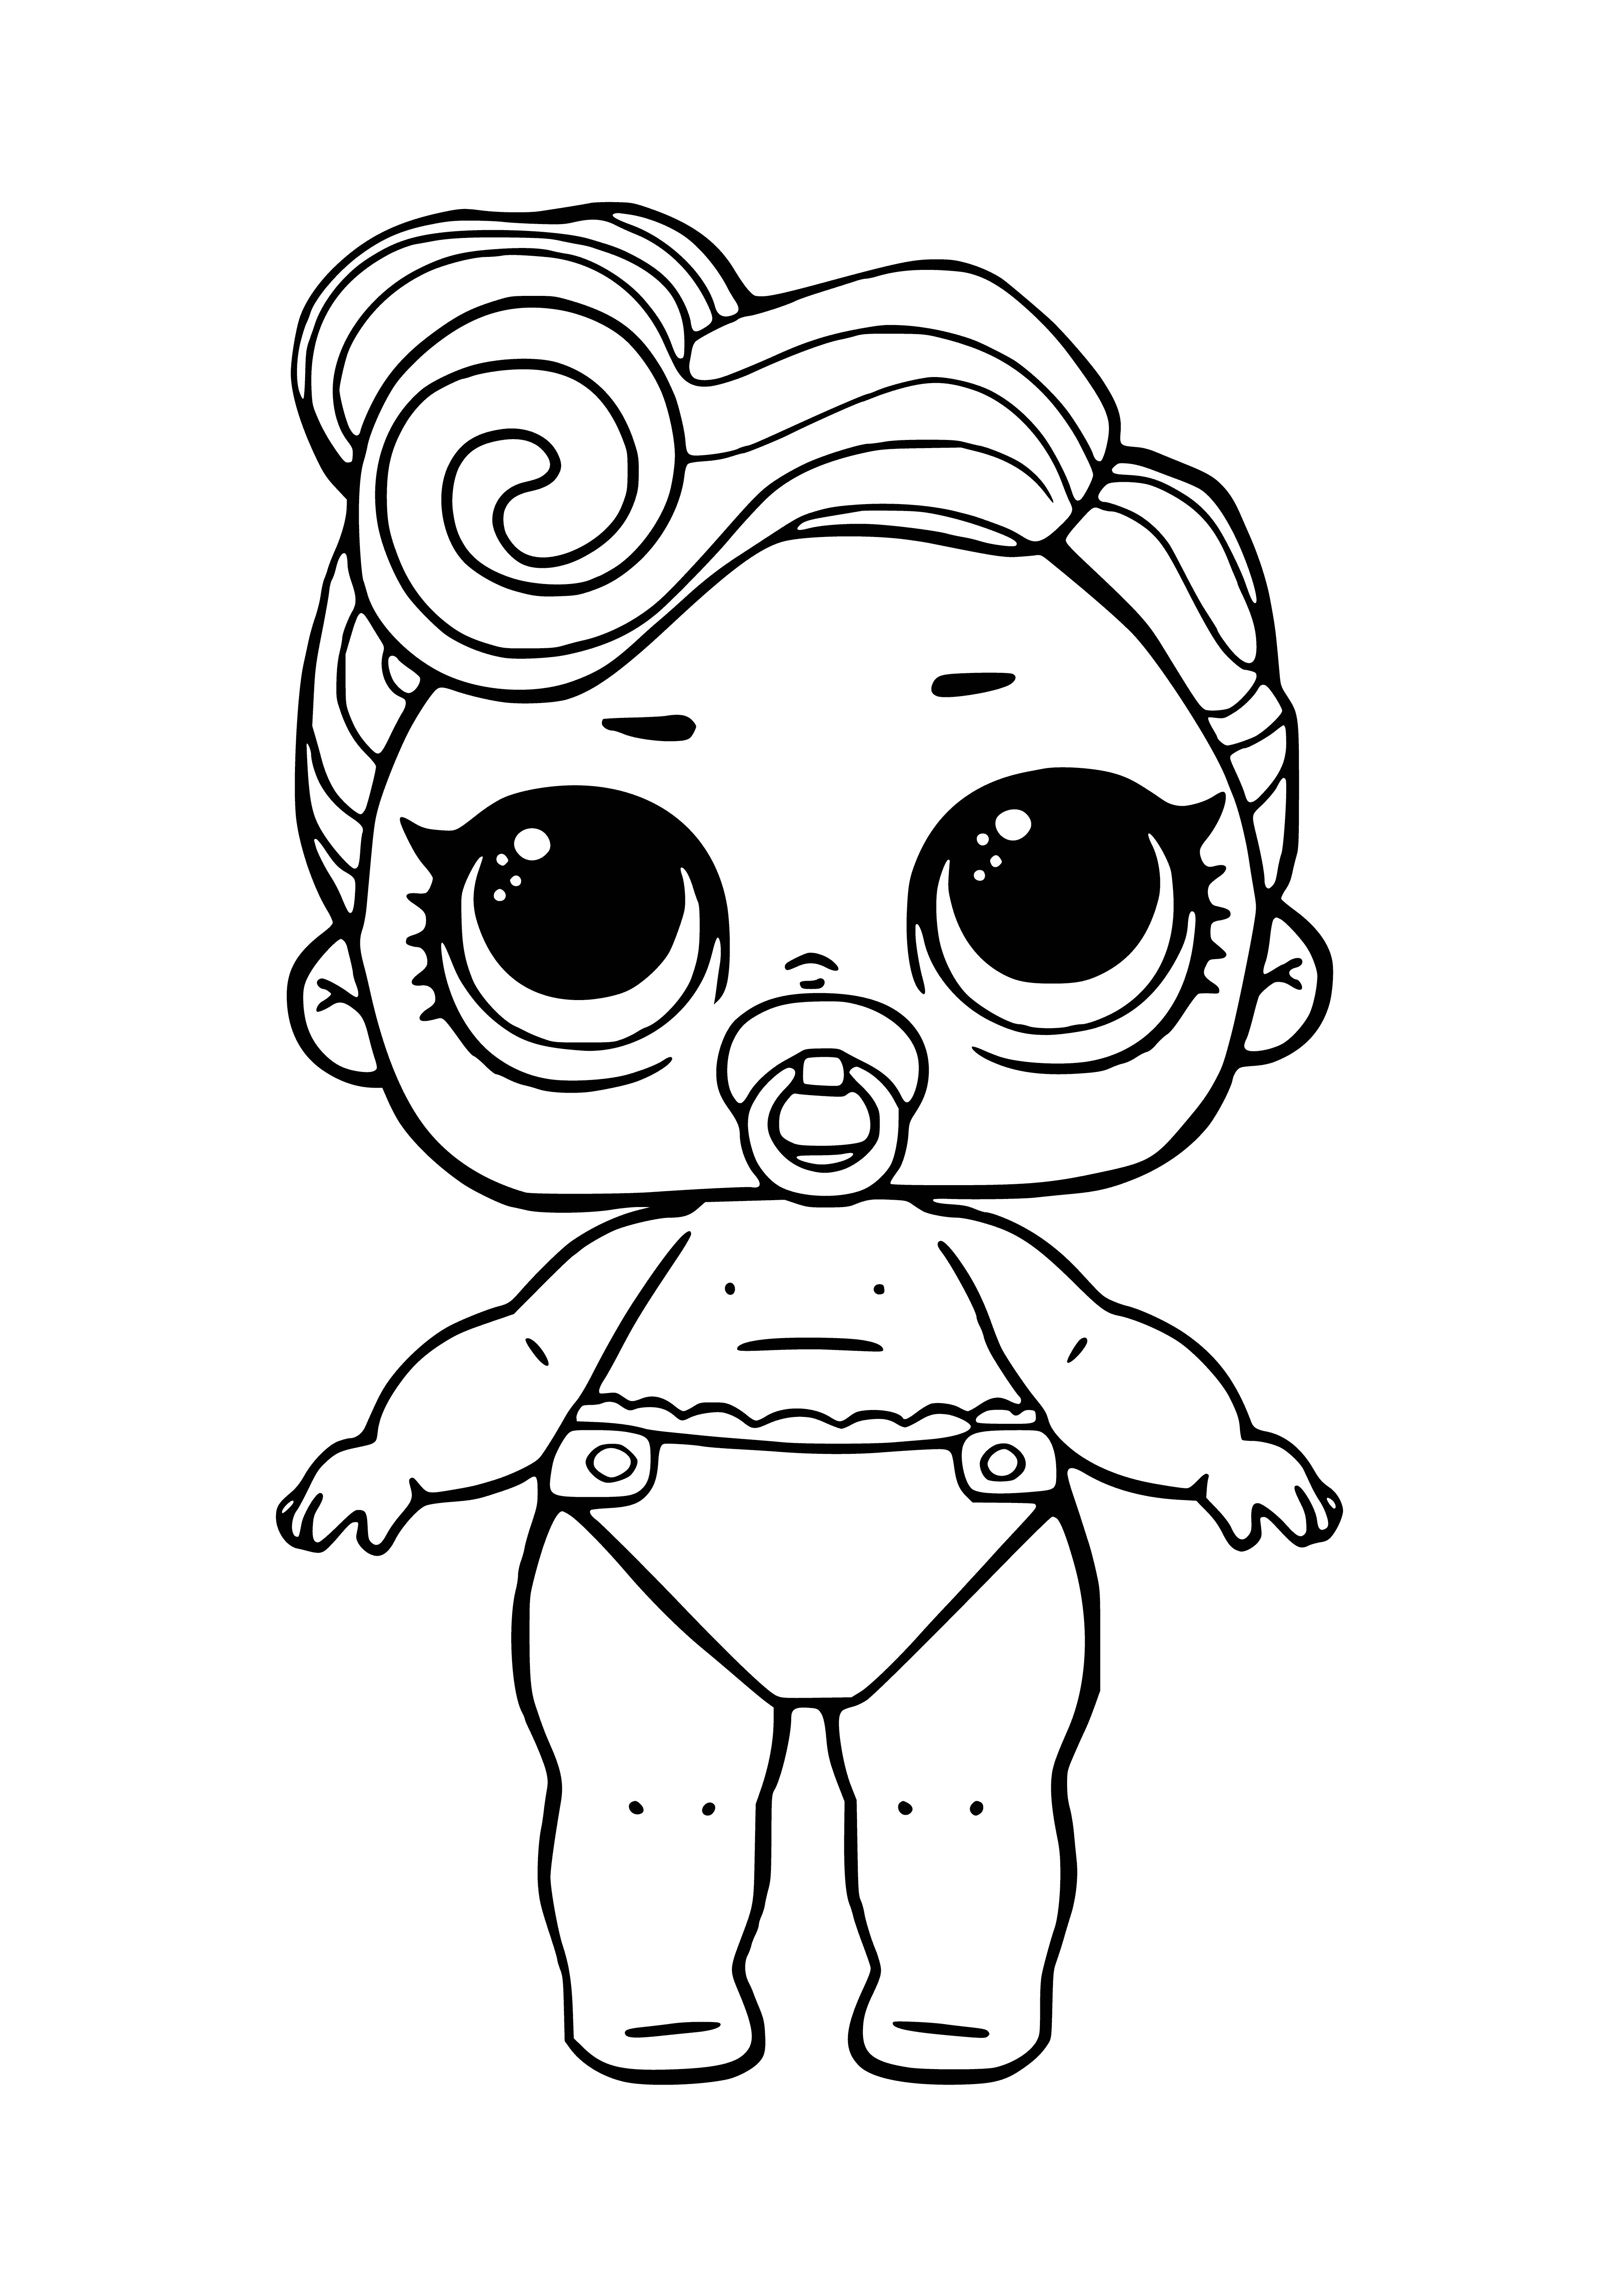 LOL baby Diva coloring page